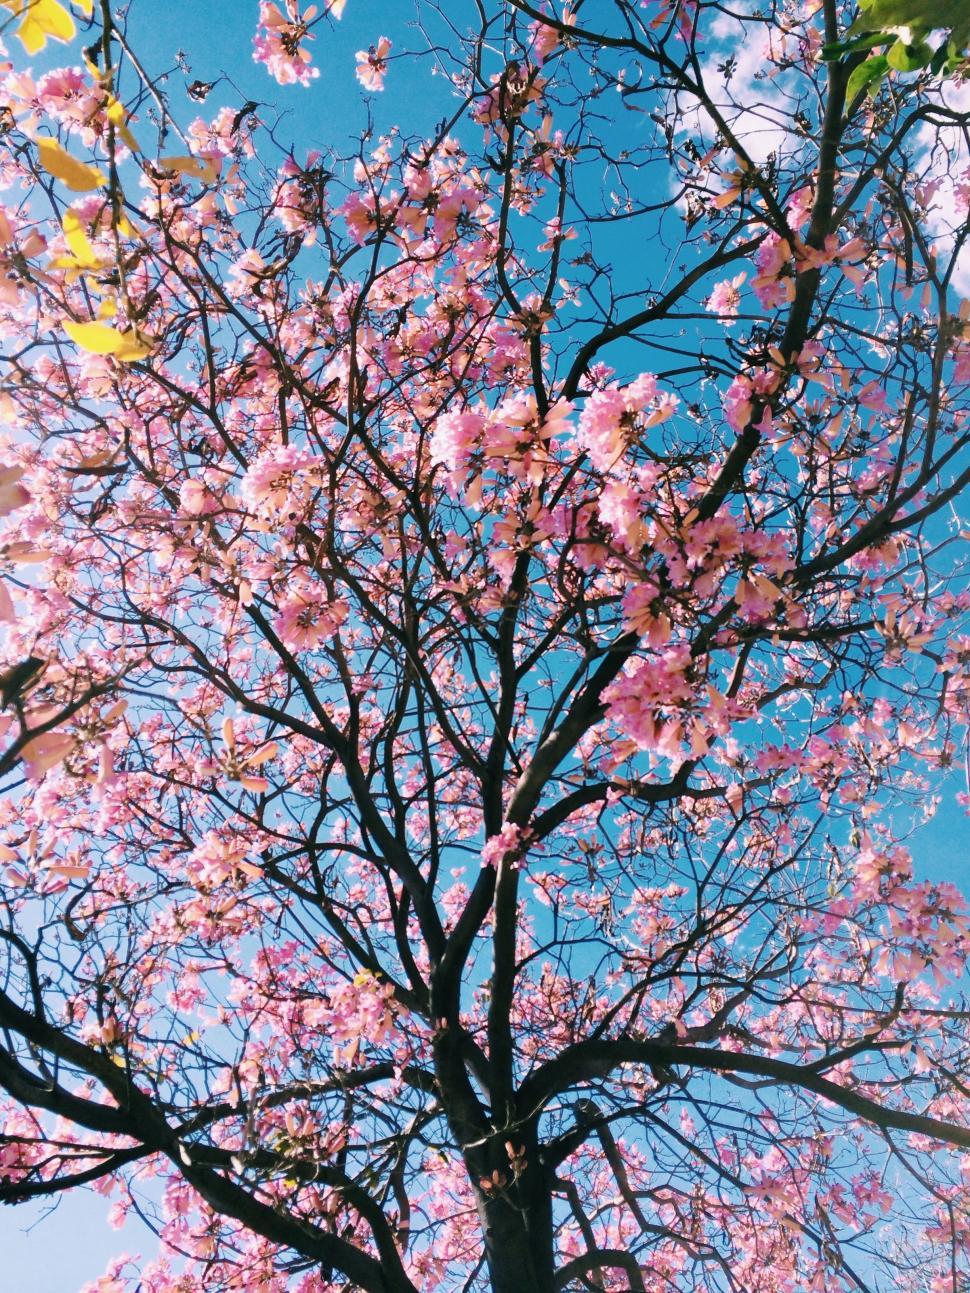 Free Image of Blooming Pink Flowers Adorn Tree Branches 